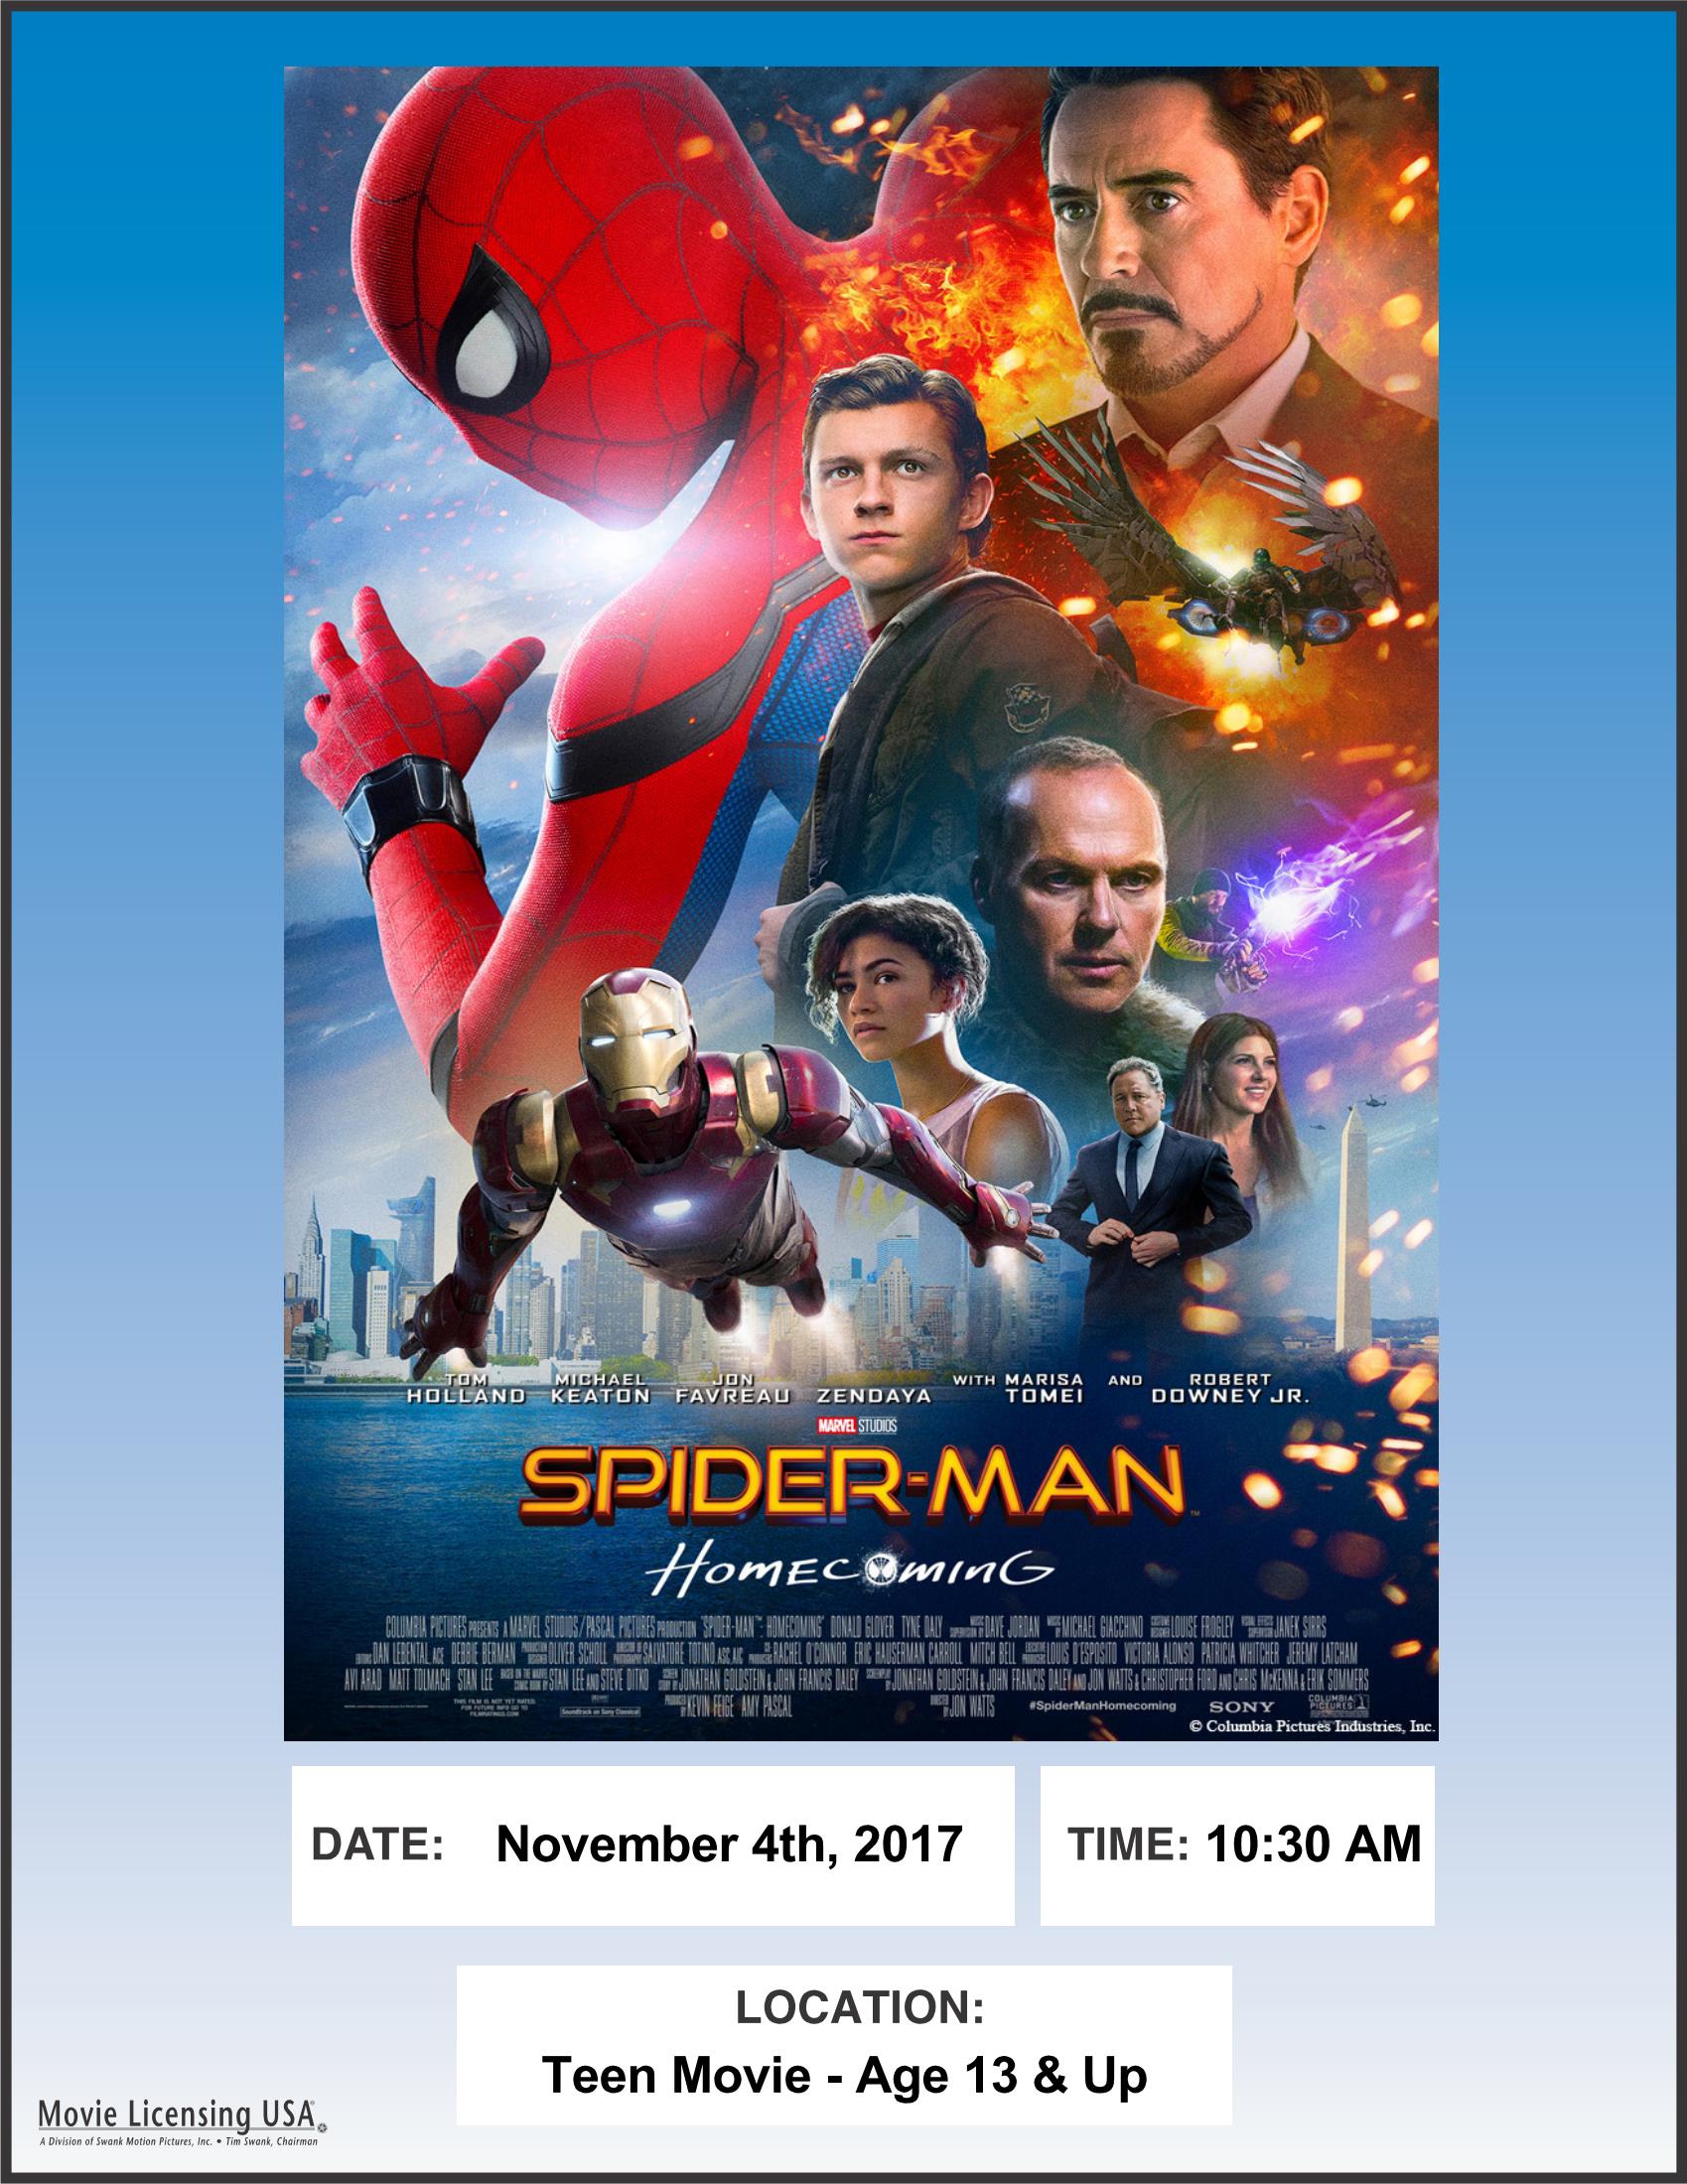 SPIDER_MAN_HOMECOMING_poster(1)_Page_1.jpeg